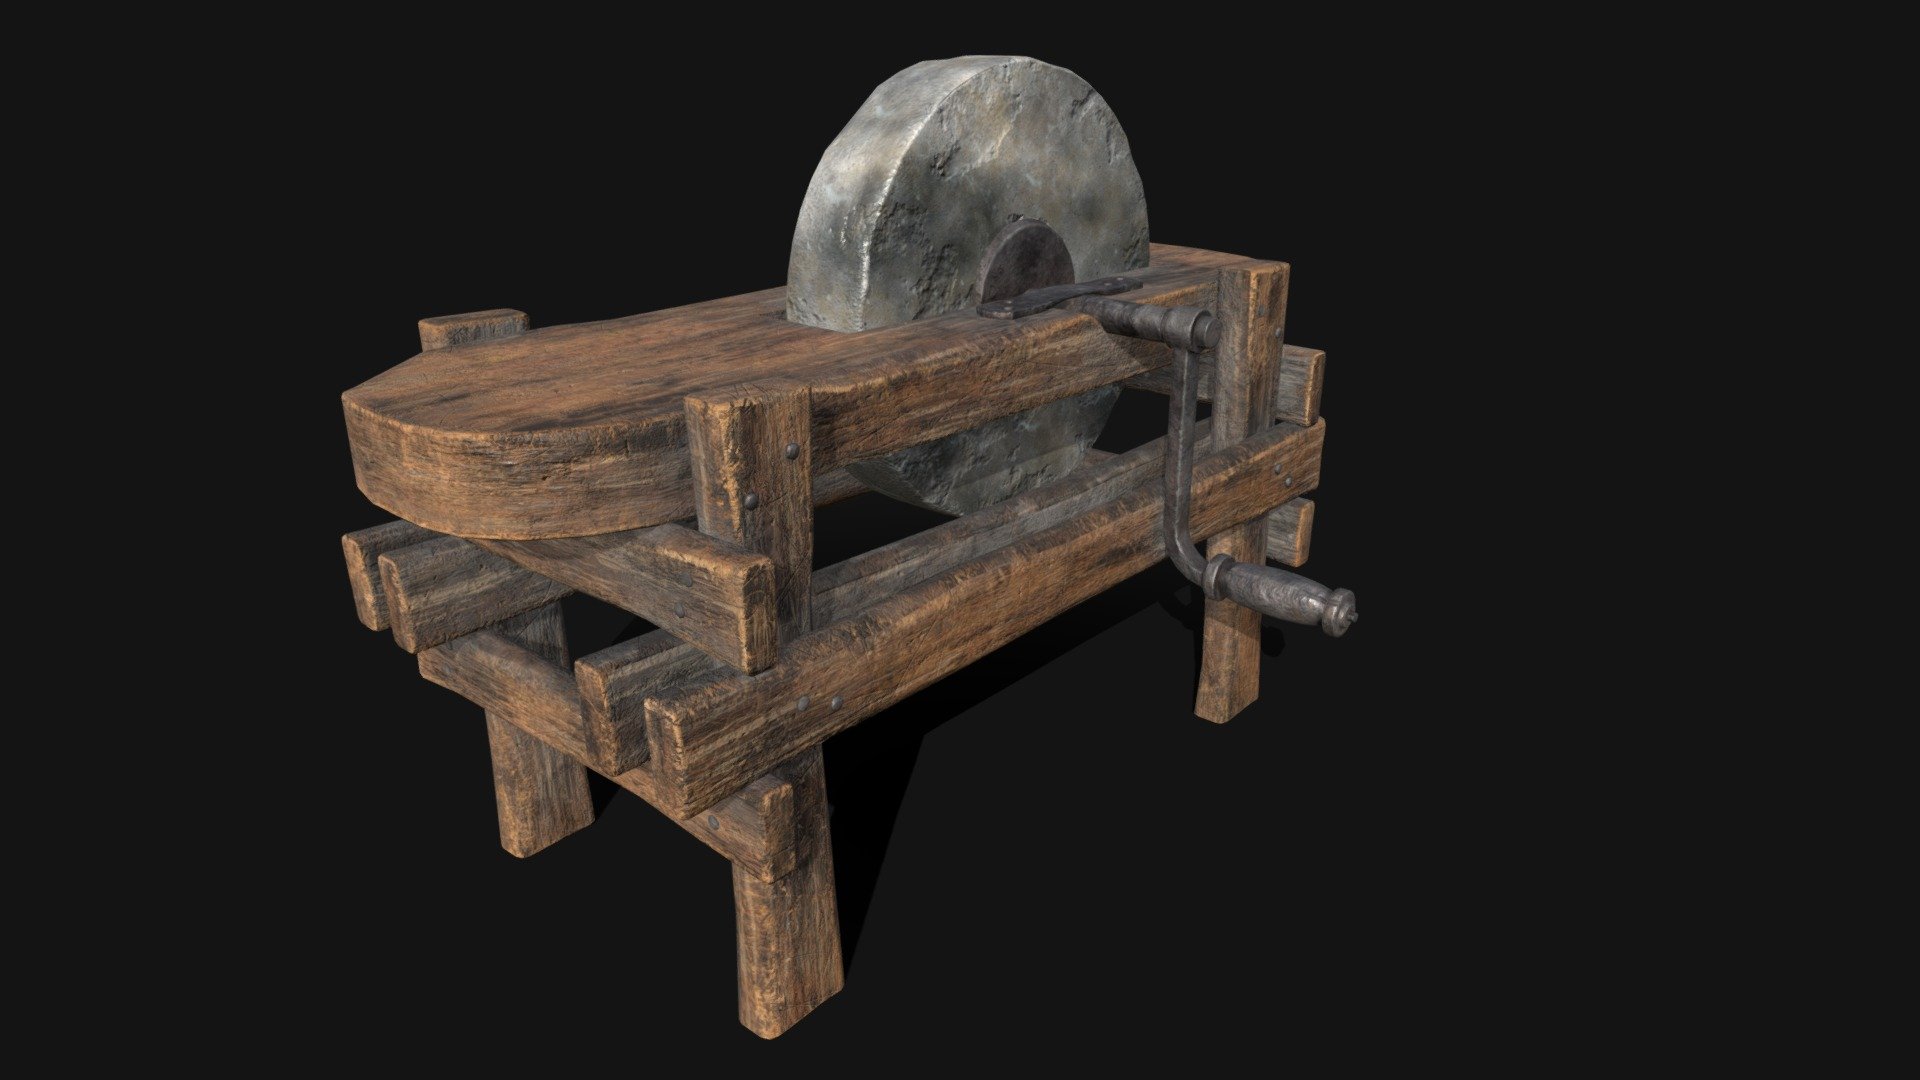 Medieval Grindstone 3D Model. This model contains the Medieval Grindstone itself 

All modeled in Maya, textured with Substance Painter.

The model was built to scale and is UV unwrapped properly. Contains a 4K and 2K texture set.  

⦁   10746 tris. 

⦁   Contains: .FBX .OBJ and .DAE

⦁   Model has clean topology. No Ngons.

⦁   Built to scale

⦁   Unwrapped UV Map

⦁   4K Texture set

⦁   High quality details

⦁   Based on real life references

⦁   Renders done in Marmoset Toolbag

Polycount: 

Verts 5753

Edges 11271 

Faces 5596

Tris 10746 

If you have any questions please feel free to ask me 3d model